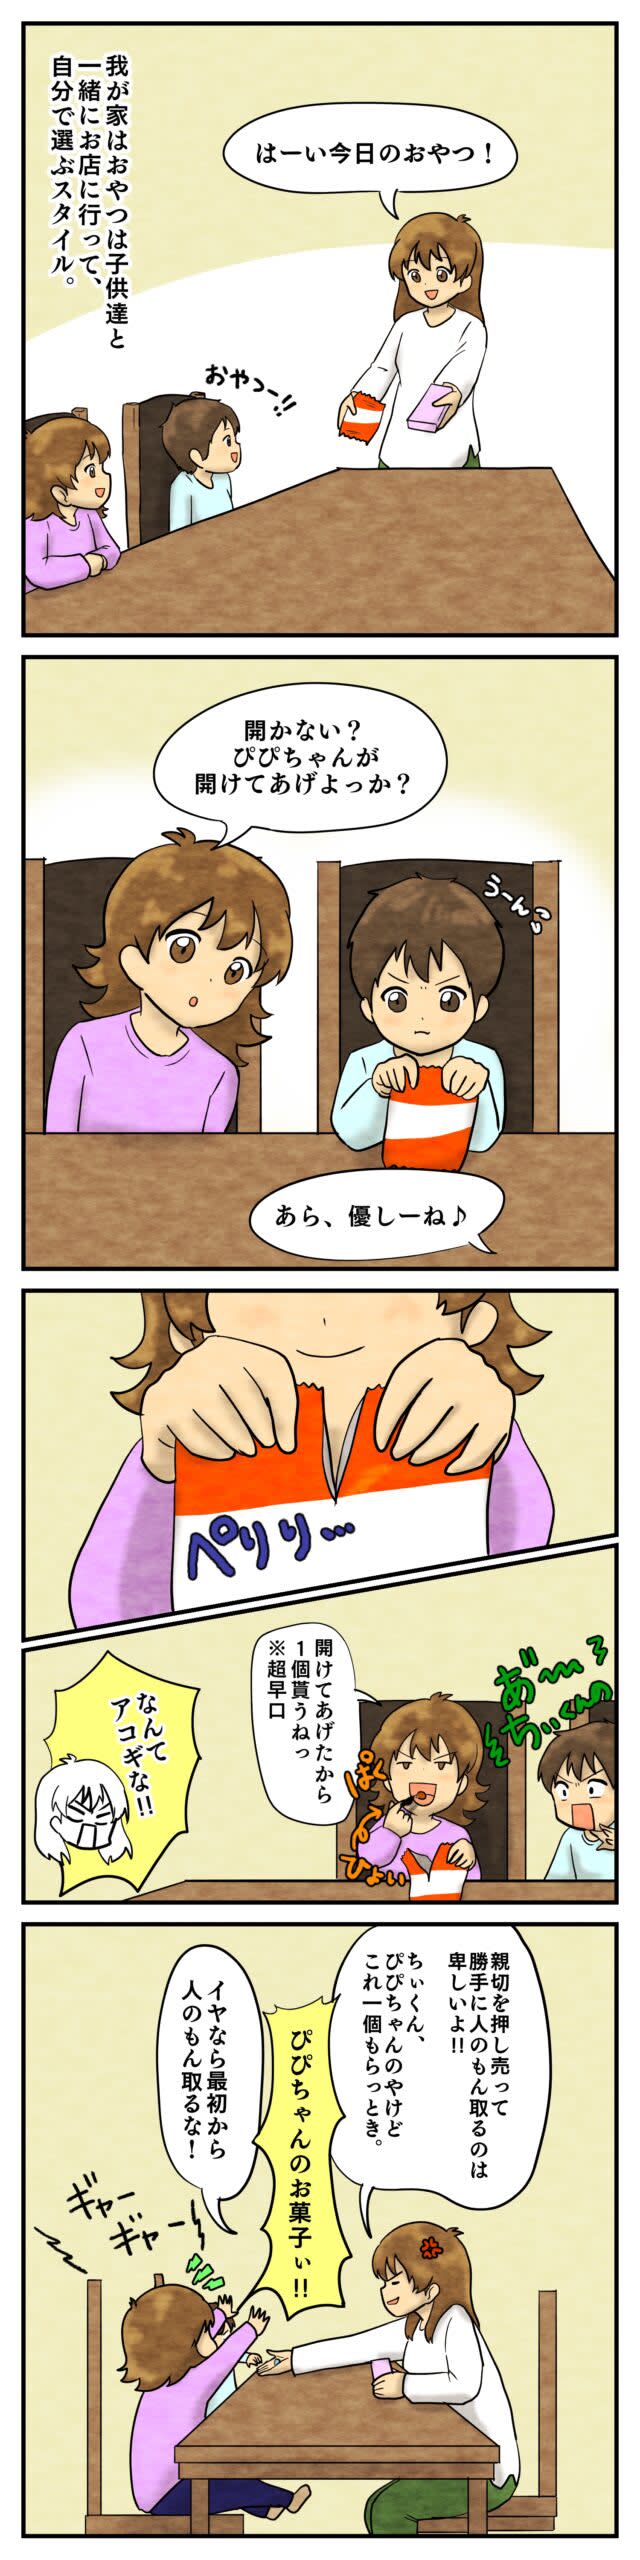 Non-non, you don't eat the same hands, do you?A brain battle between an older sister who wants sweets for her younger brother and a younger brother who never wants to give them | Suzu Izu...